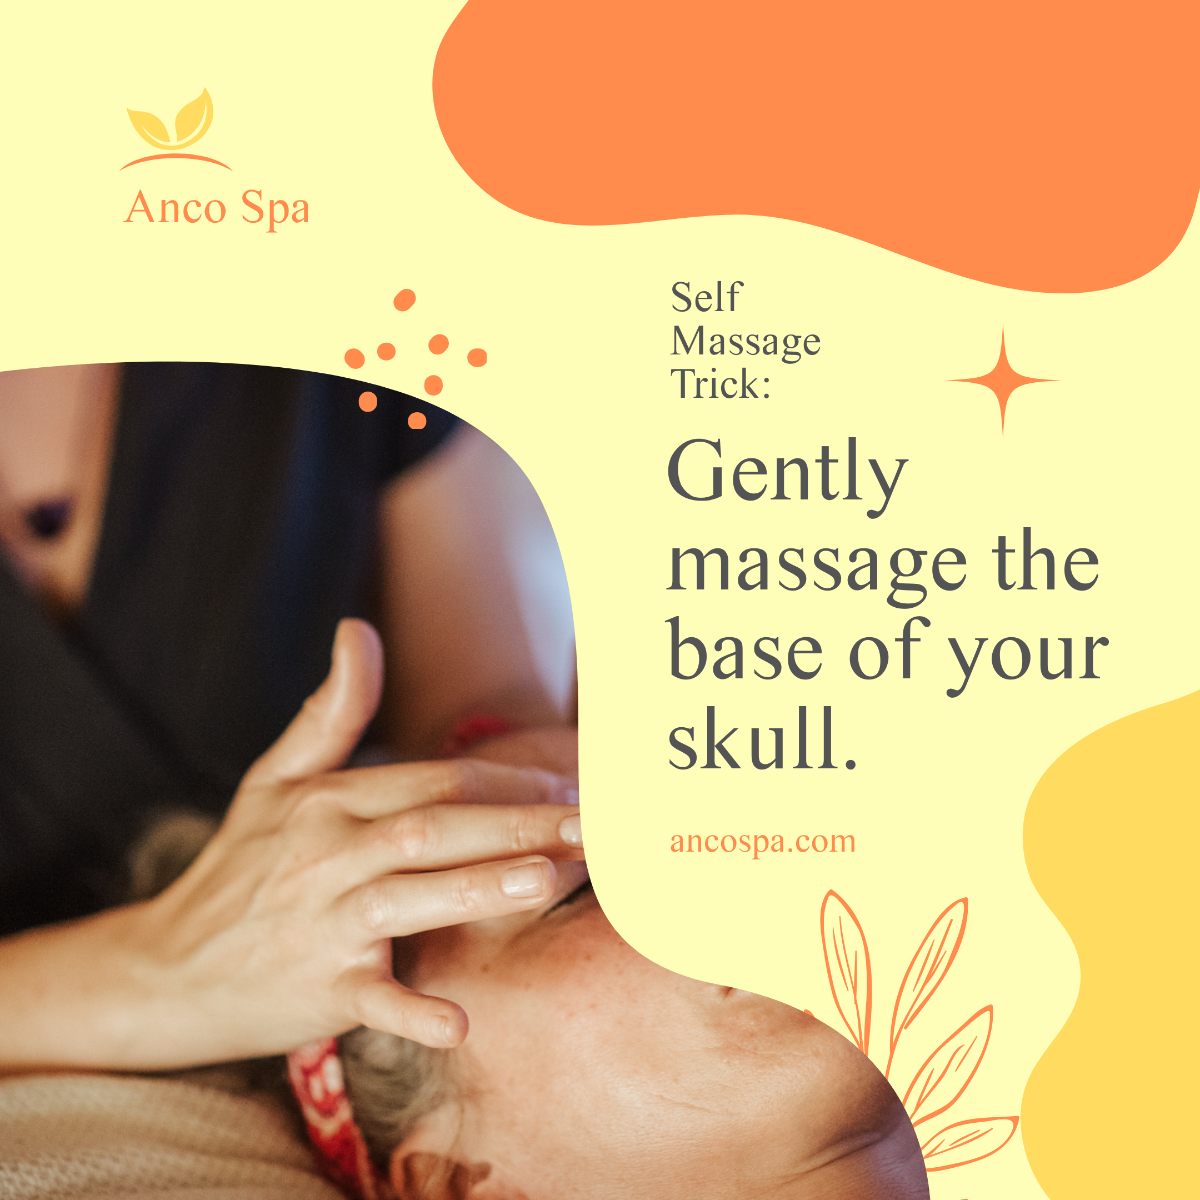 Free Self Massage Tips And Tricks Post, Instagram, Facebook Template